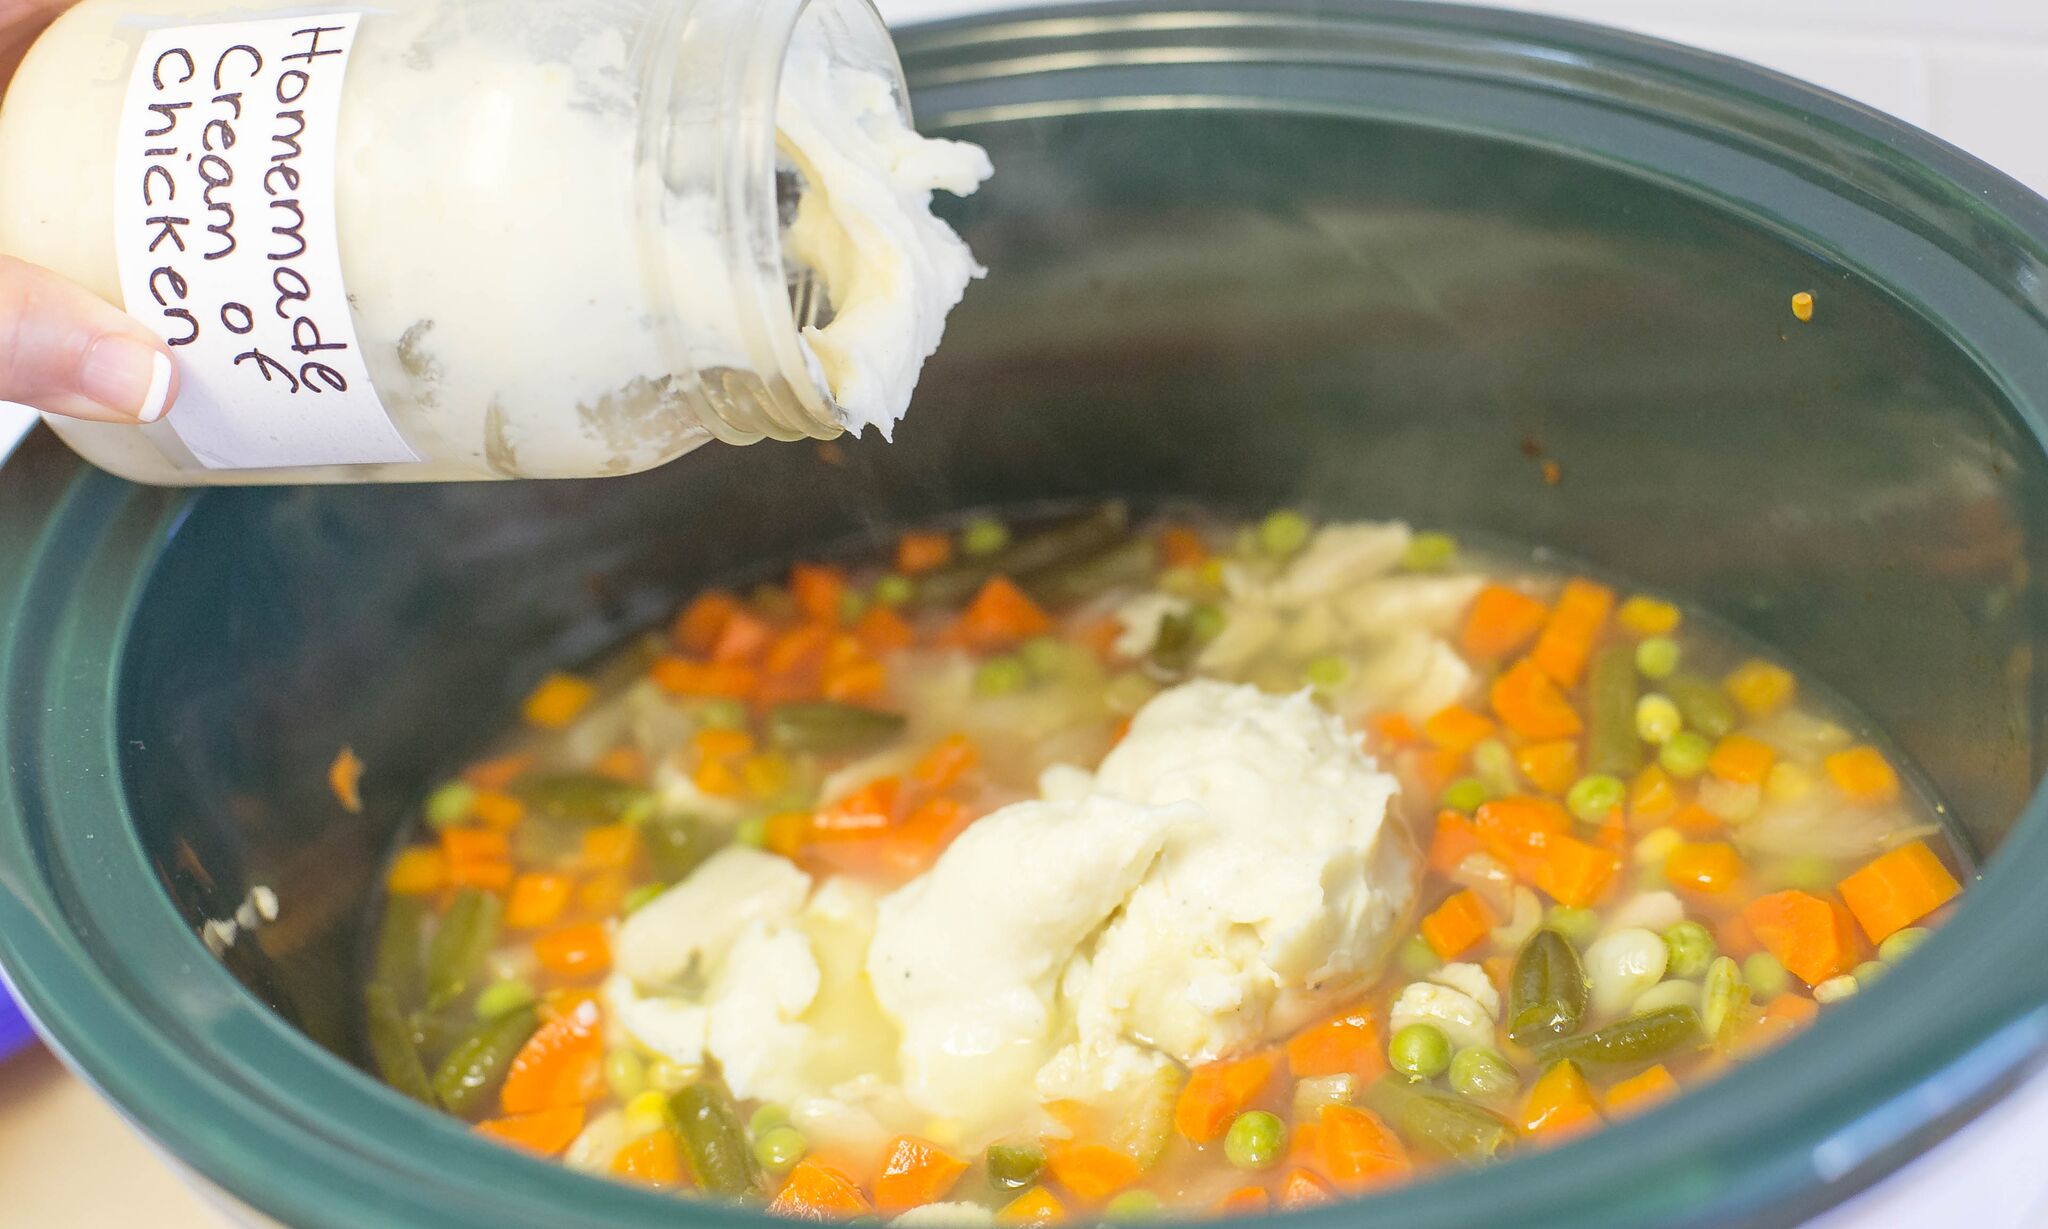 Add container of homemade cream of chicken soup to mixture in crockpot 